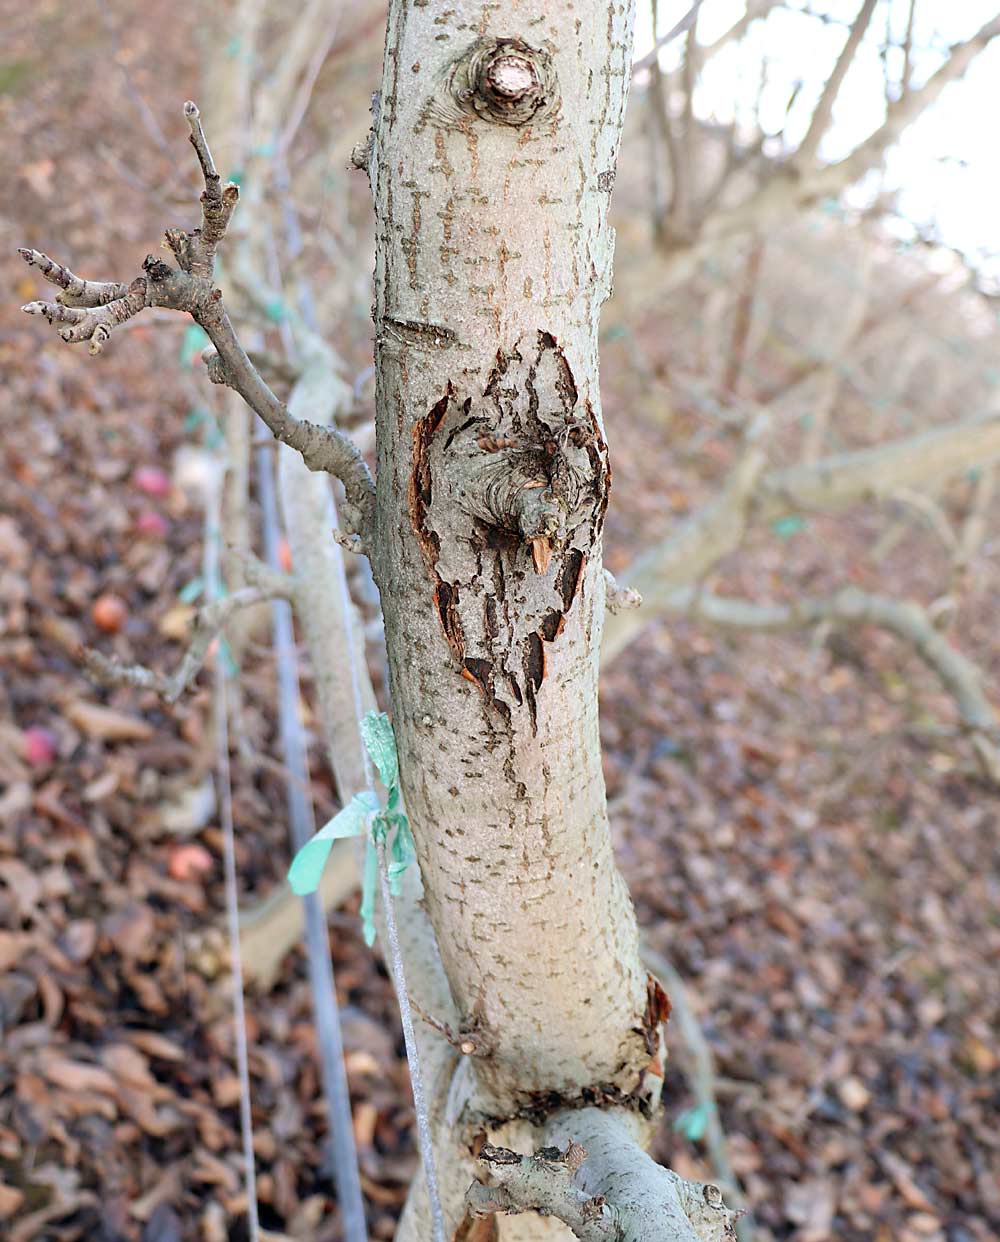 A fire blight canker on a central leader. (Courtesy Tianna DuPont/Washington State University)